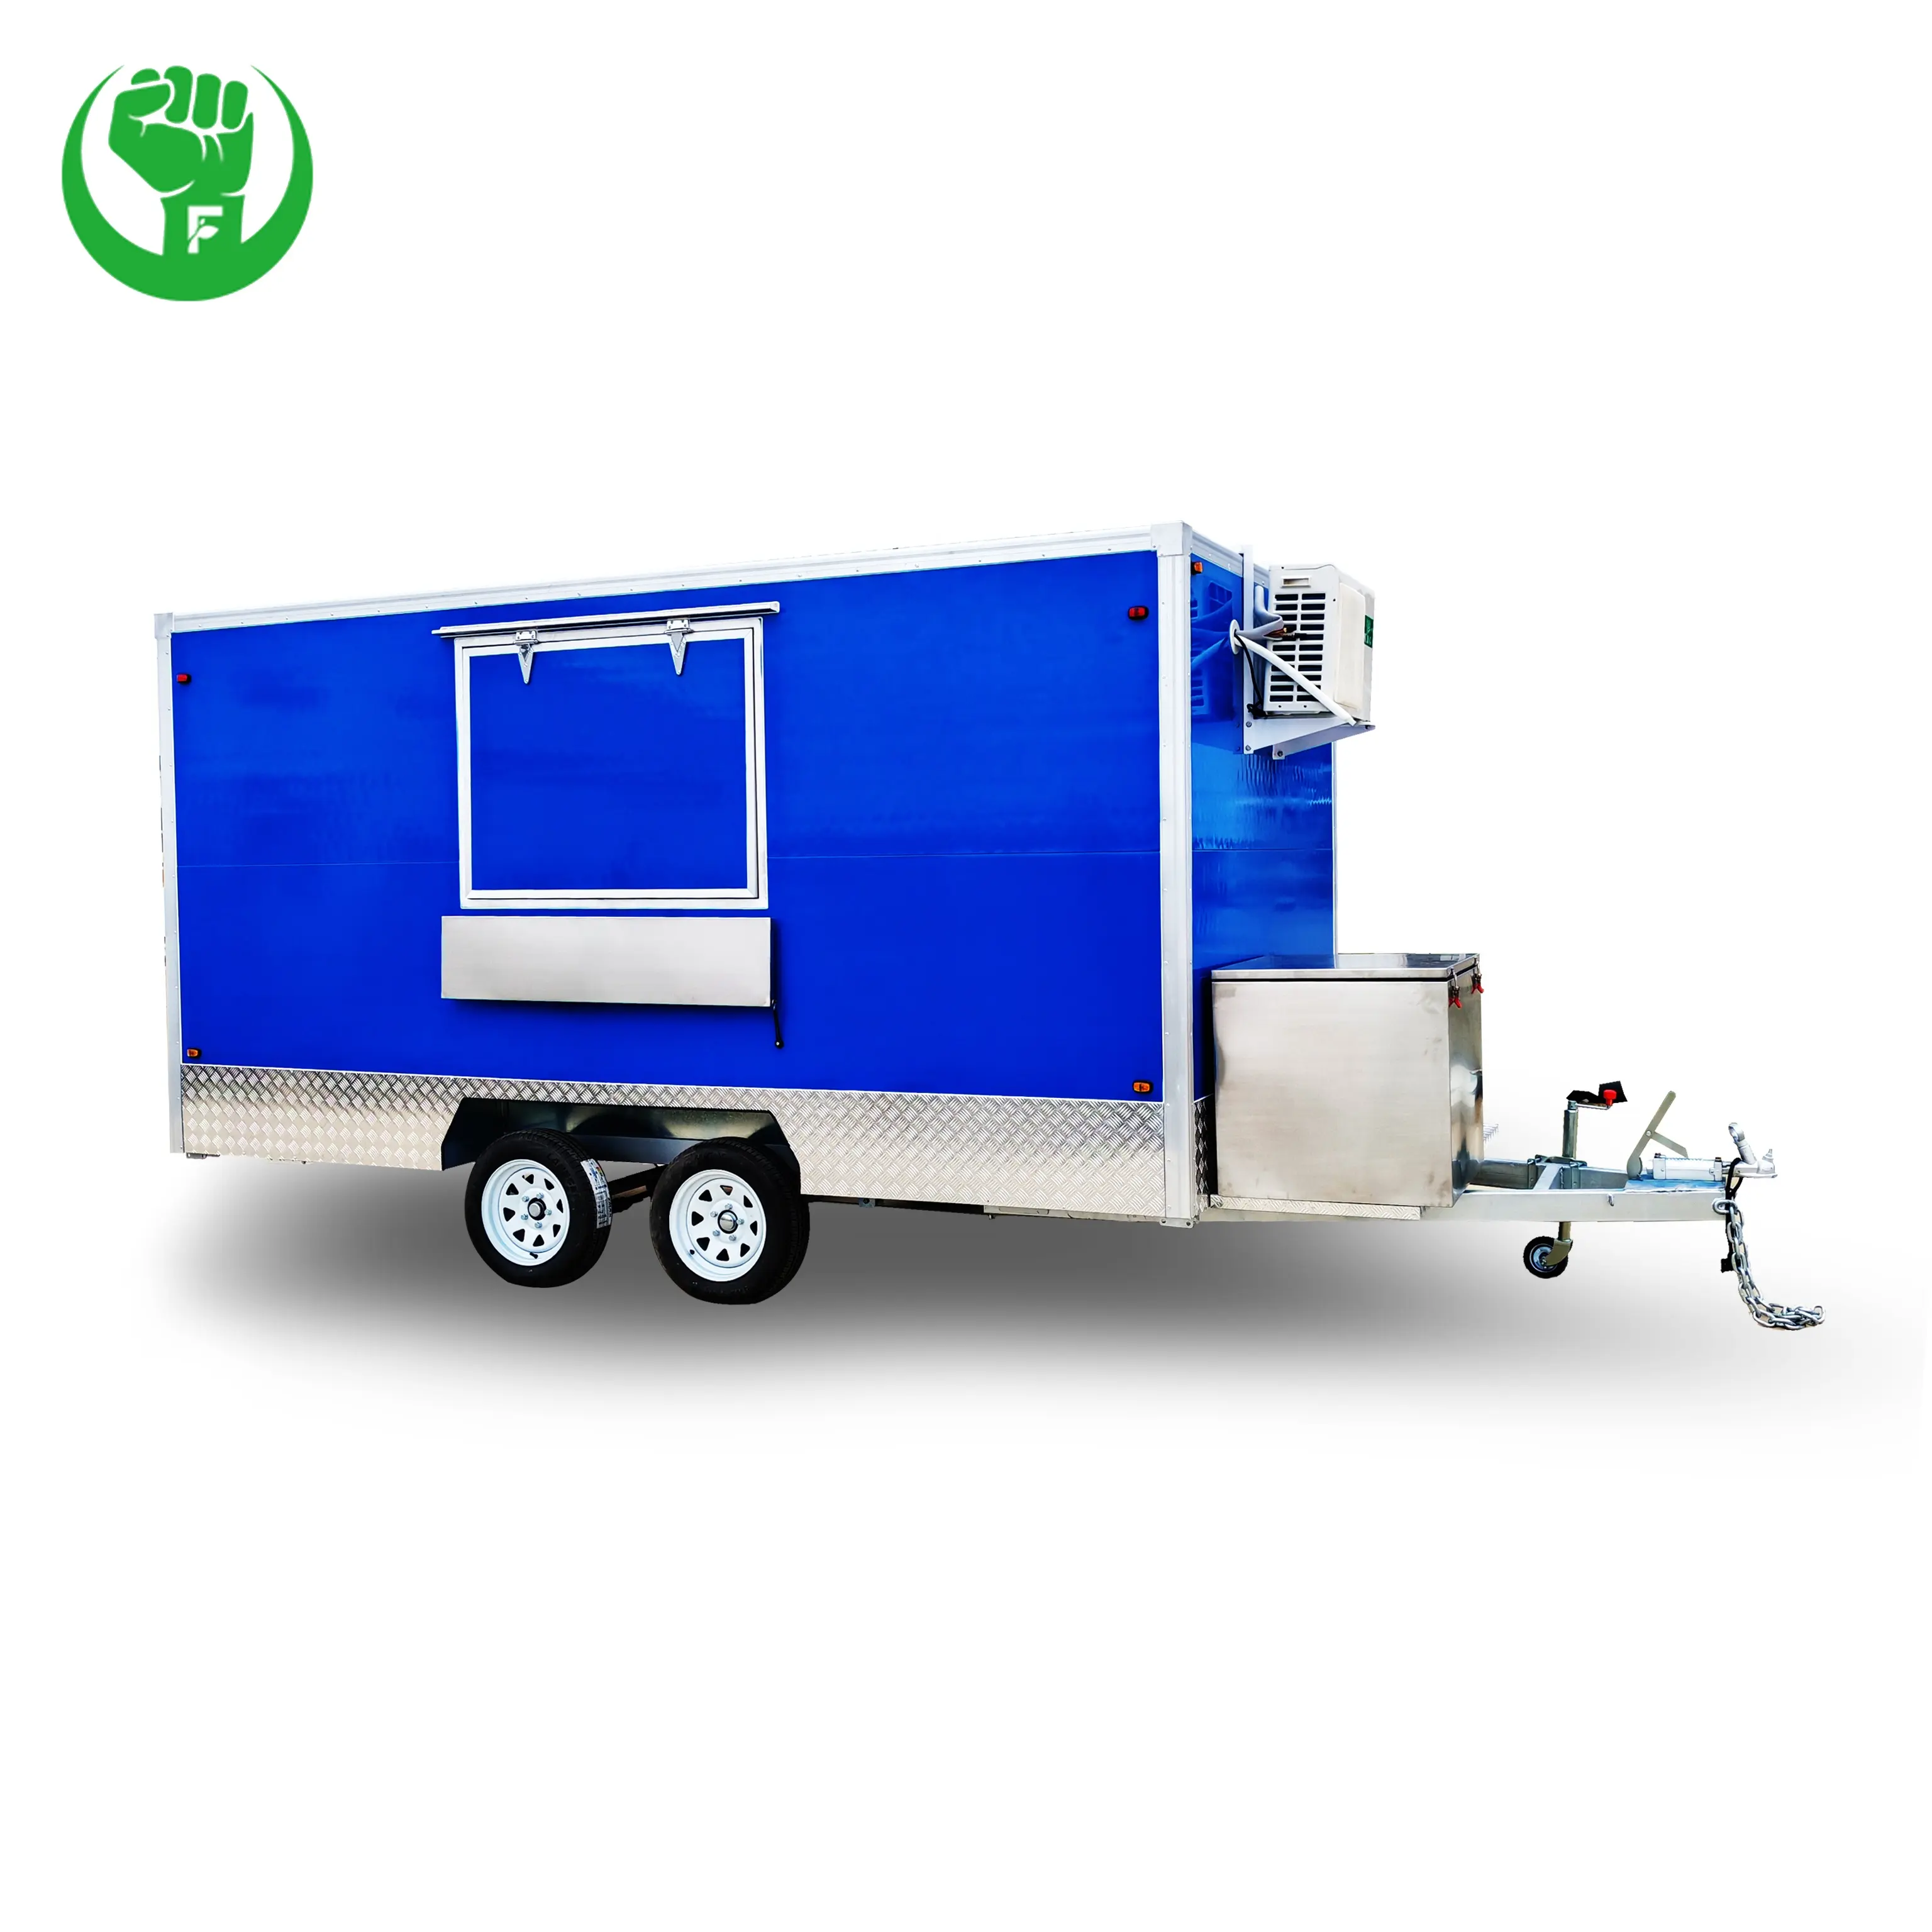 12 ft 14 ft fully equipped Snack food mobile complete dot approved food trailer truck for sale USA Europe